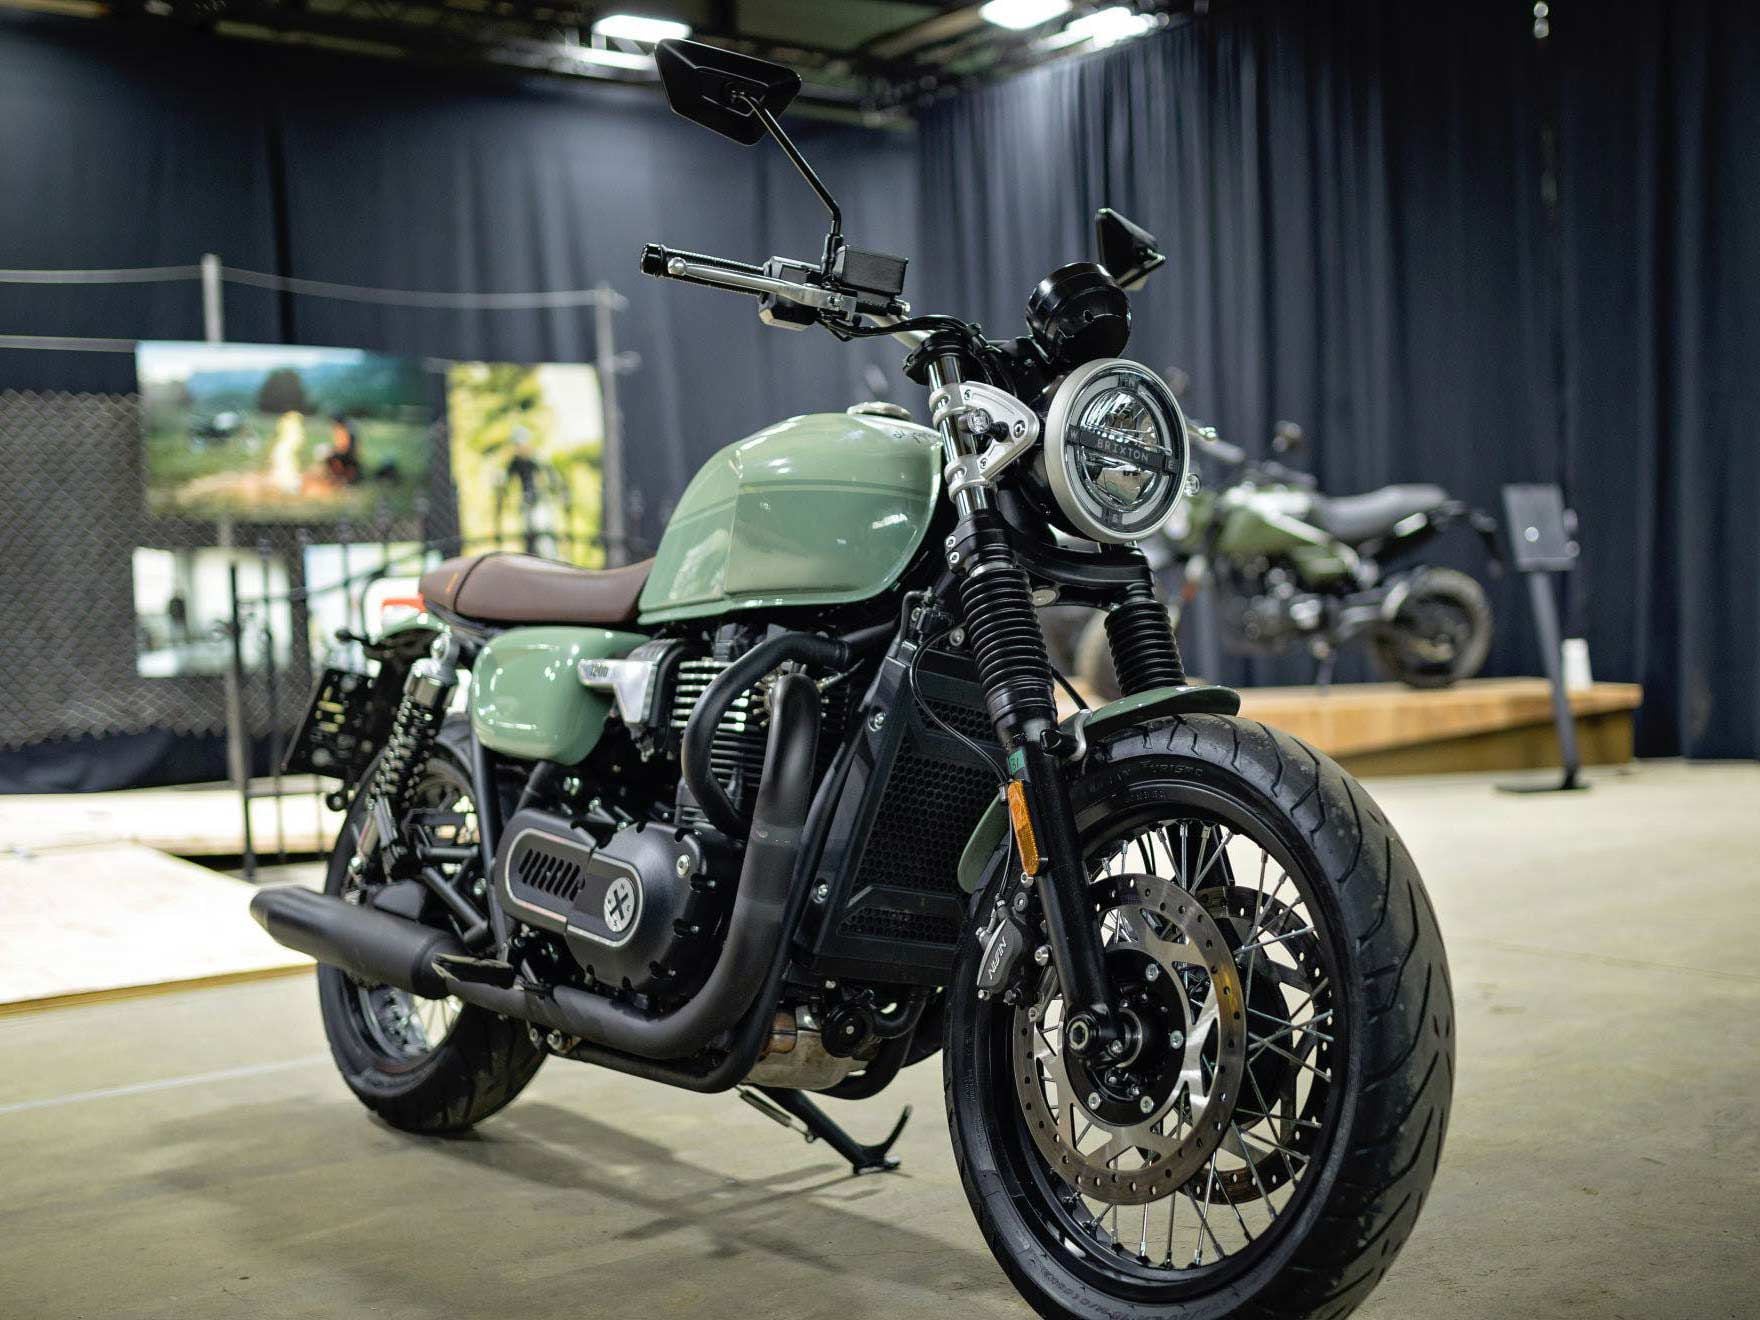 Brixton Motorcycles officially announced the new Cromwell 1200 as a 2022 model.